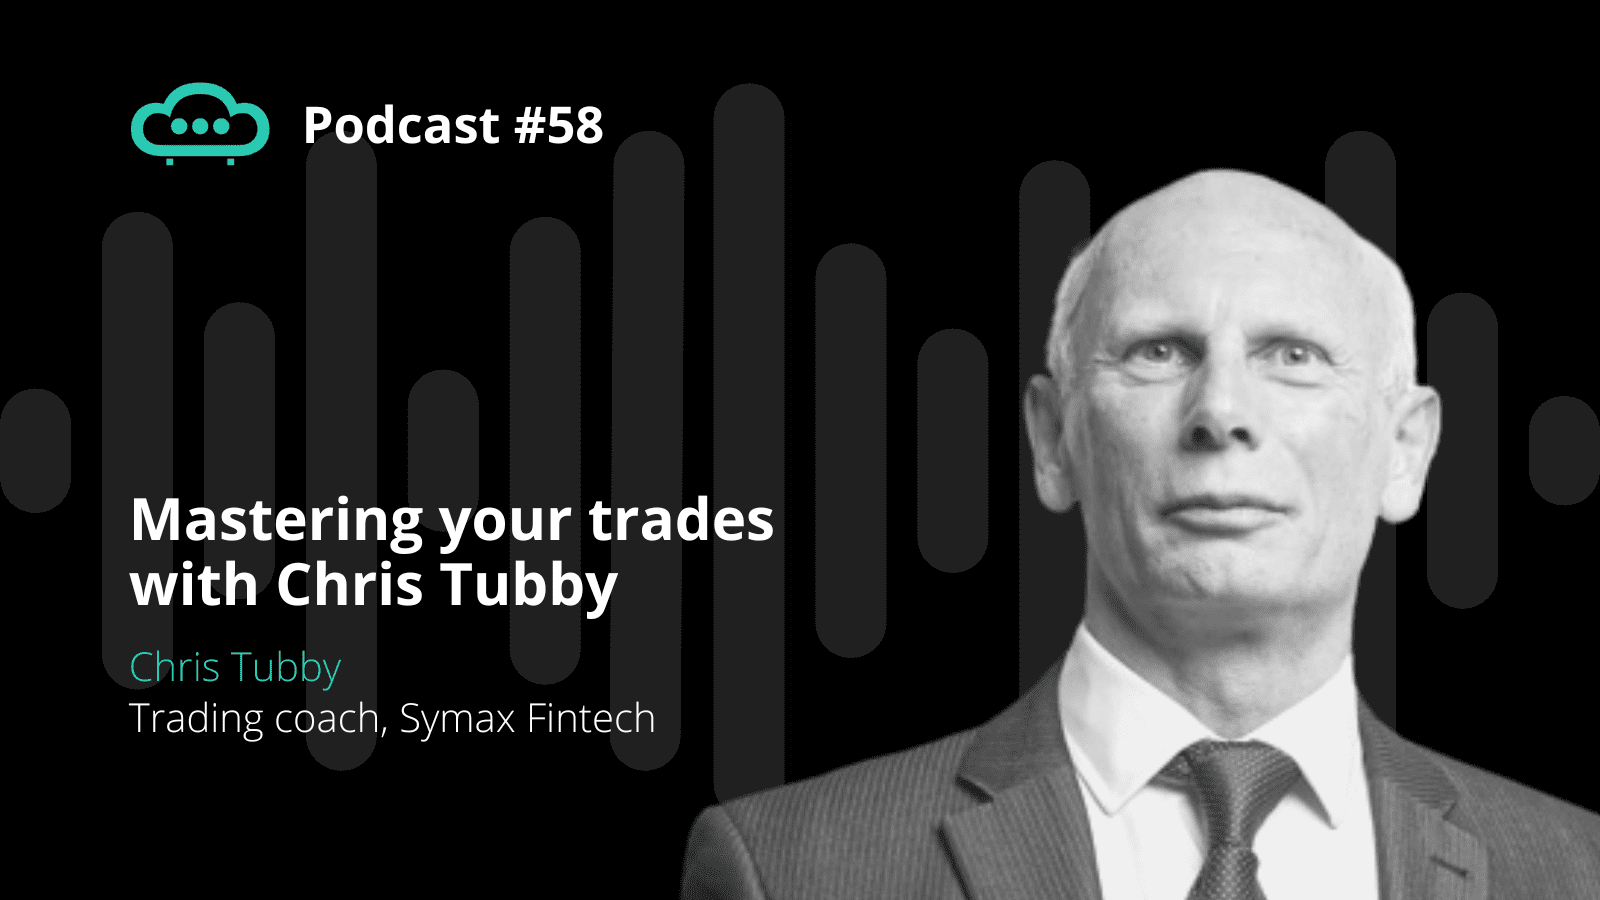 Podcast 058 - Chris Tubby Trading Coach